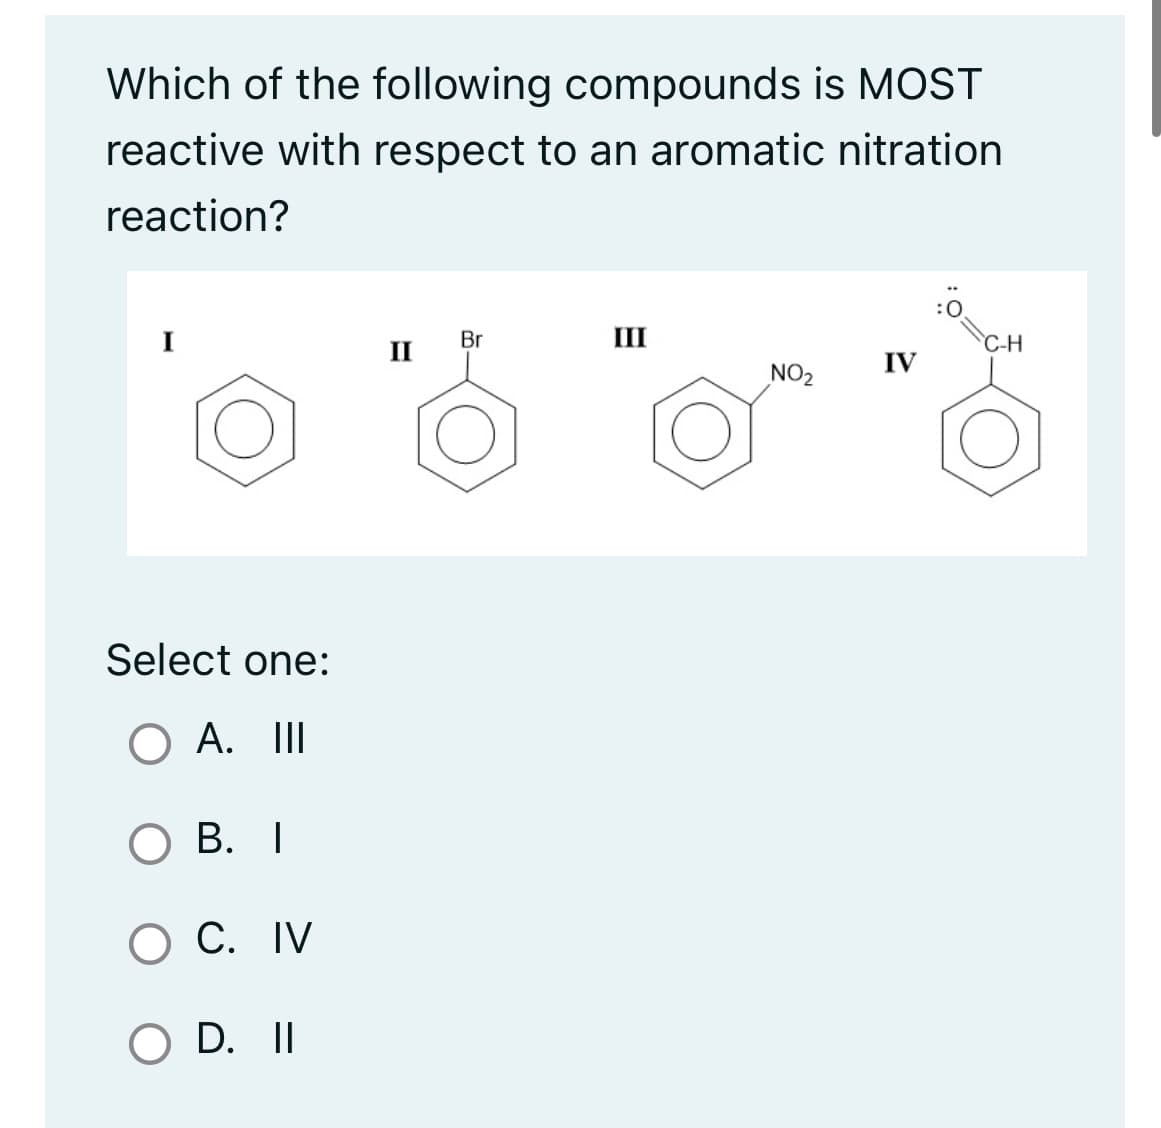 Which of the following compounds is MOST
reactive with respect to an aromatic nitration
reaction?
Select one:
O A. III
OB. I
O C. IV
O D. II
II
Br
-
III
NO₂
IV
C-H